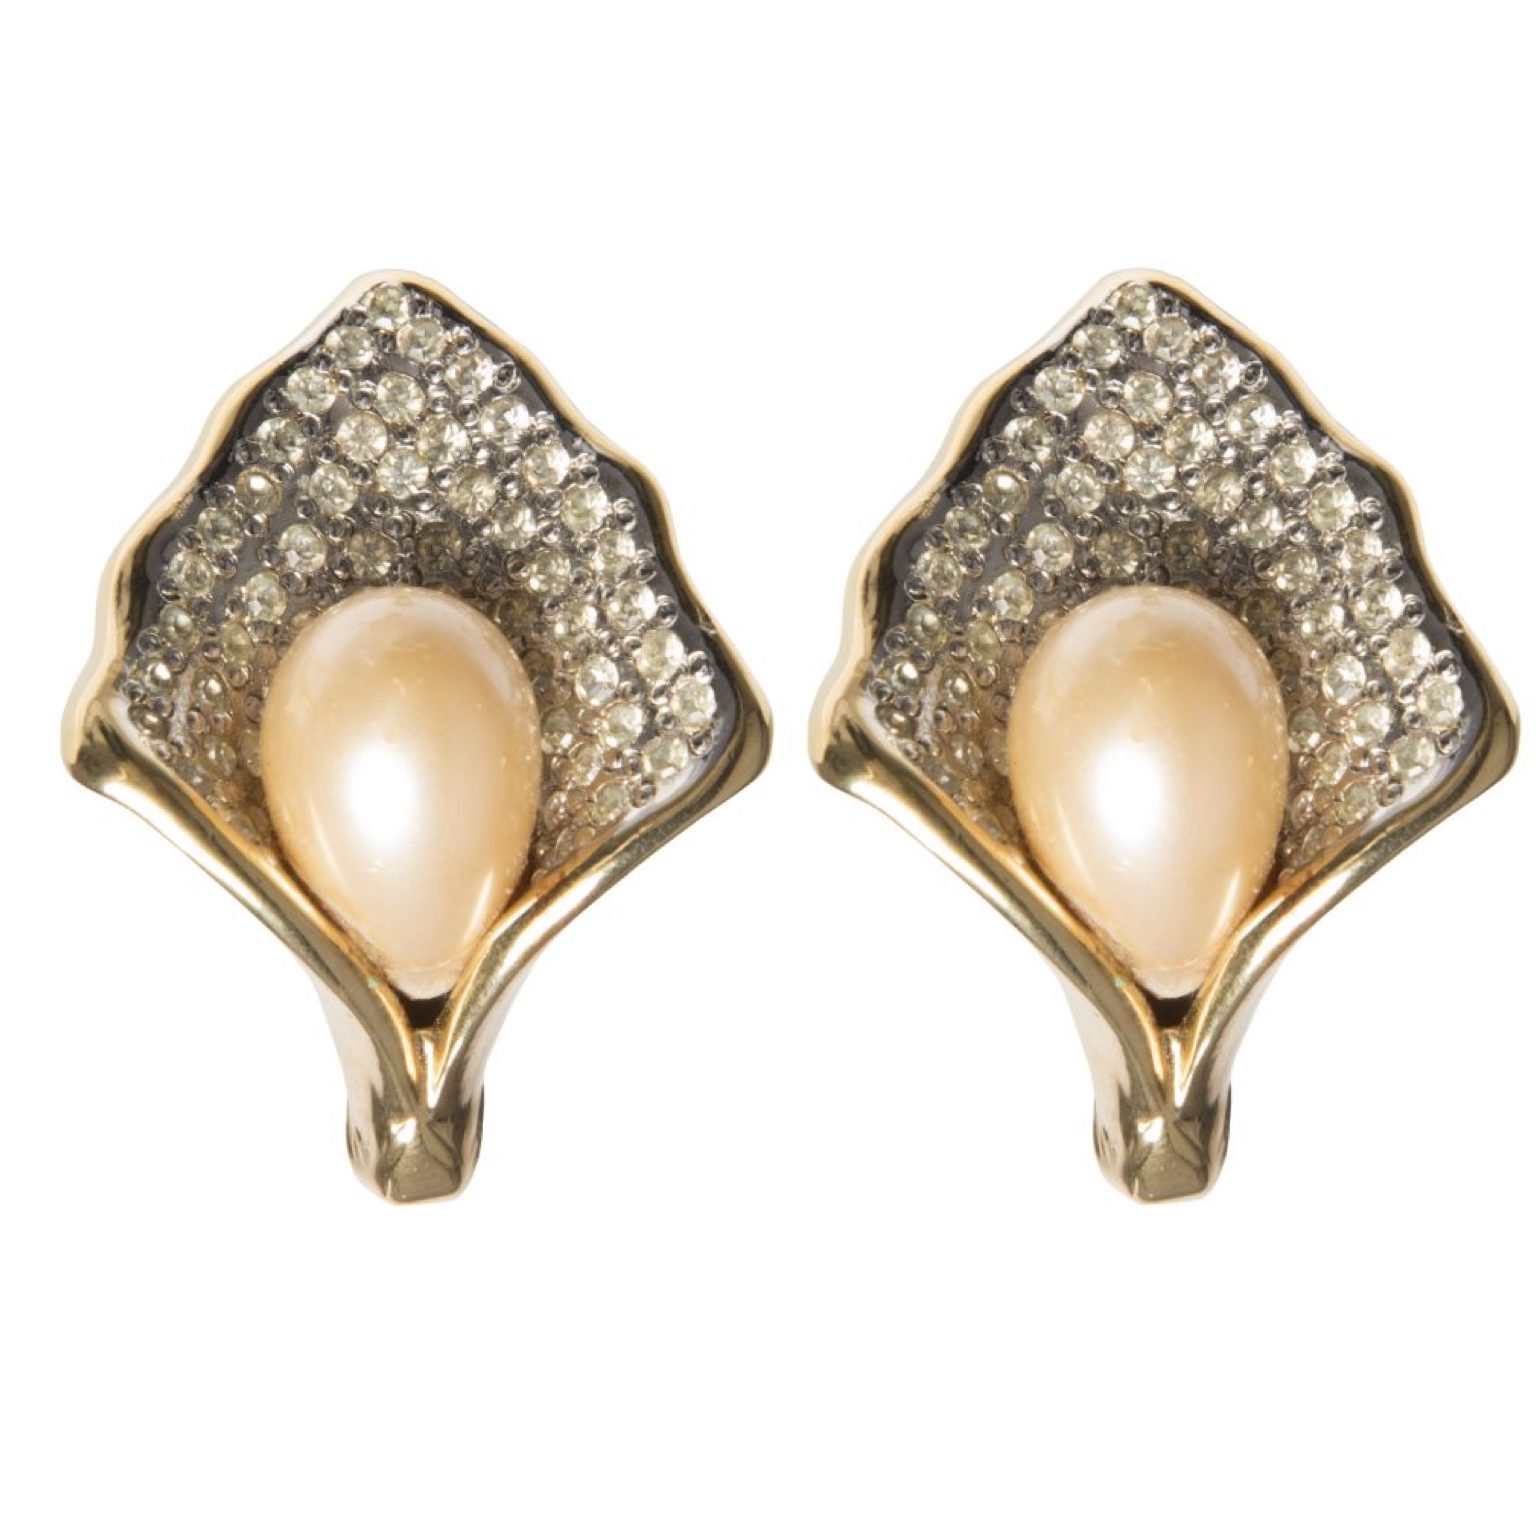 Vintage shell earrings with pearl detail